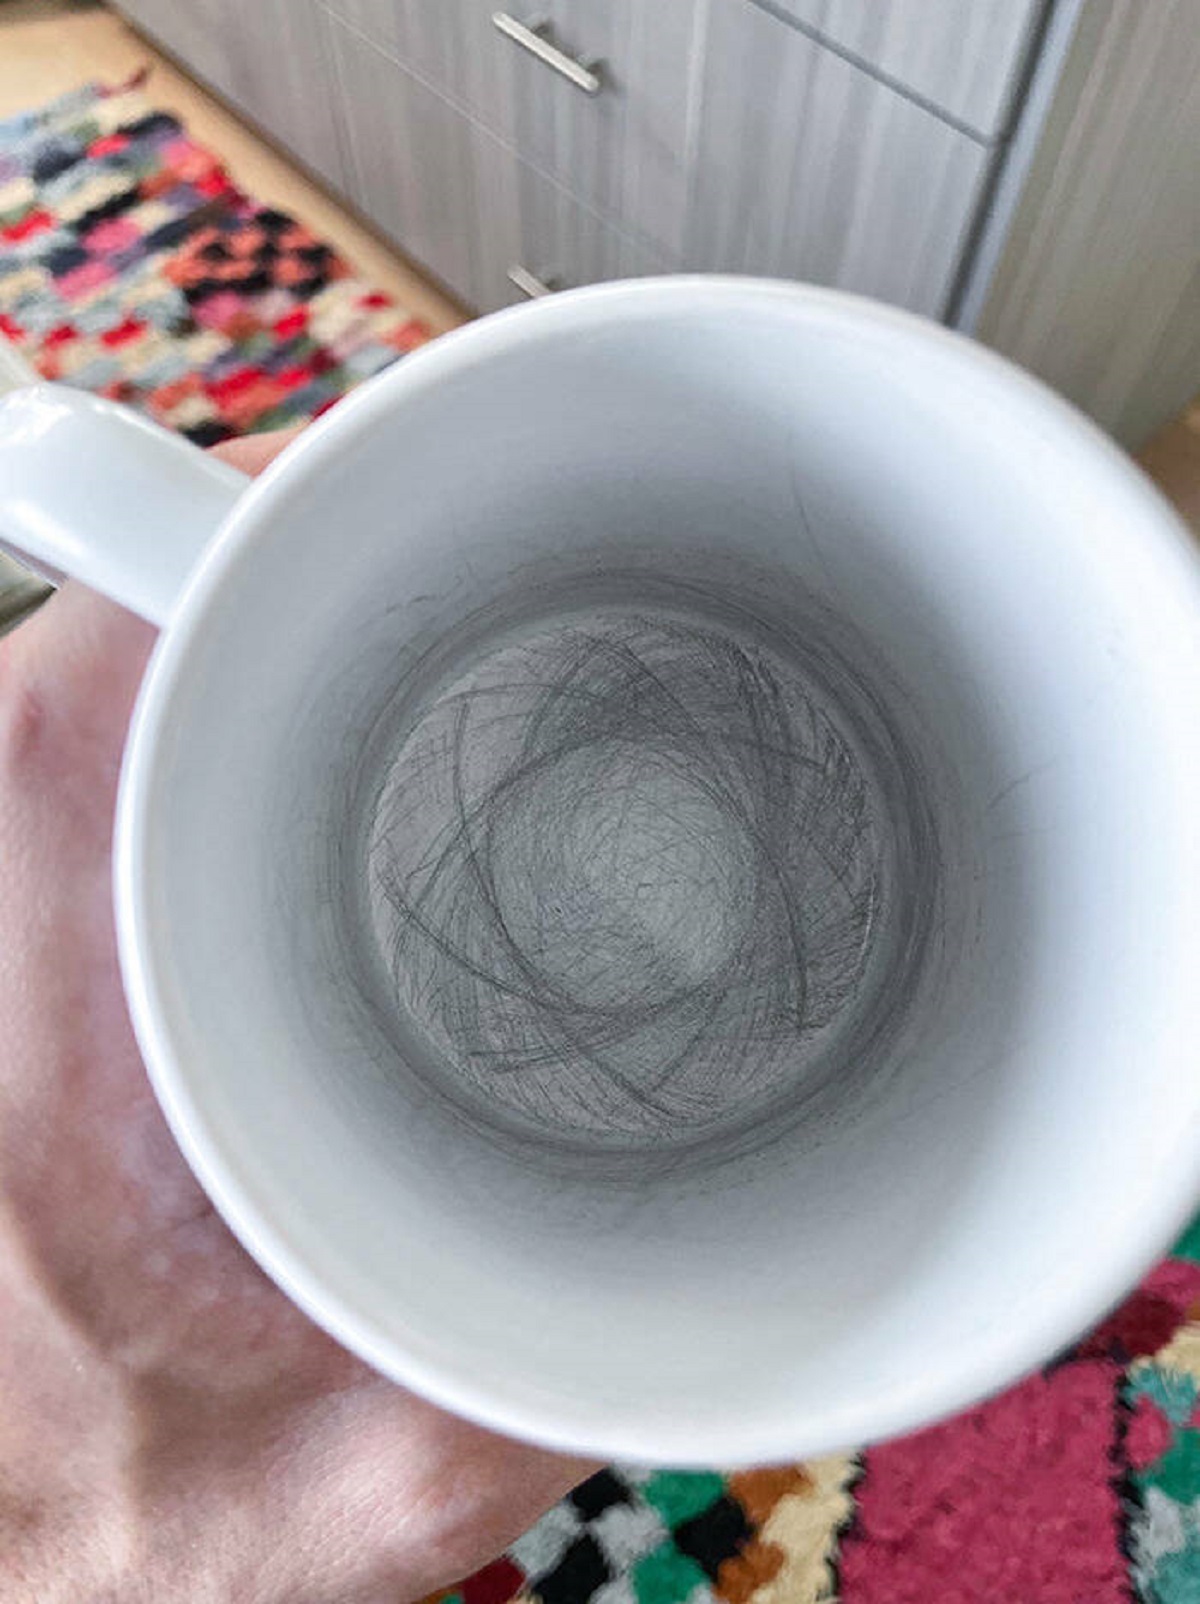 "The Stirring Pattern Formed Over Time In My Coffee Cup"